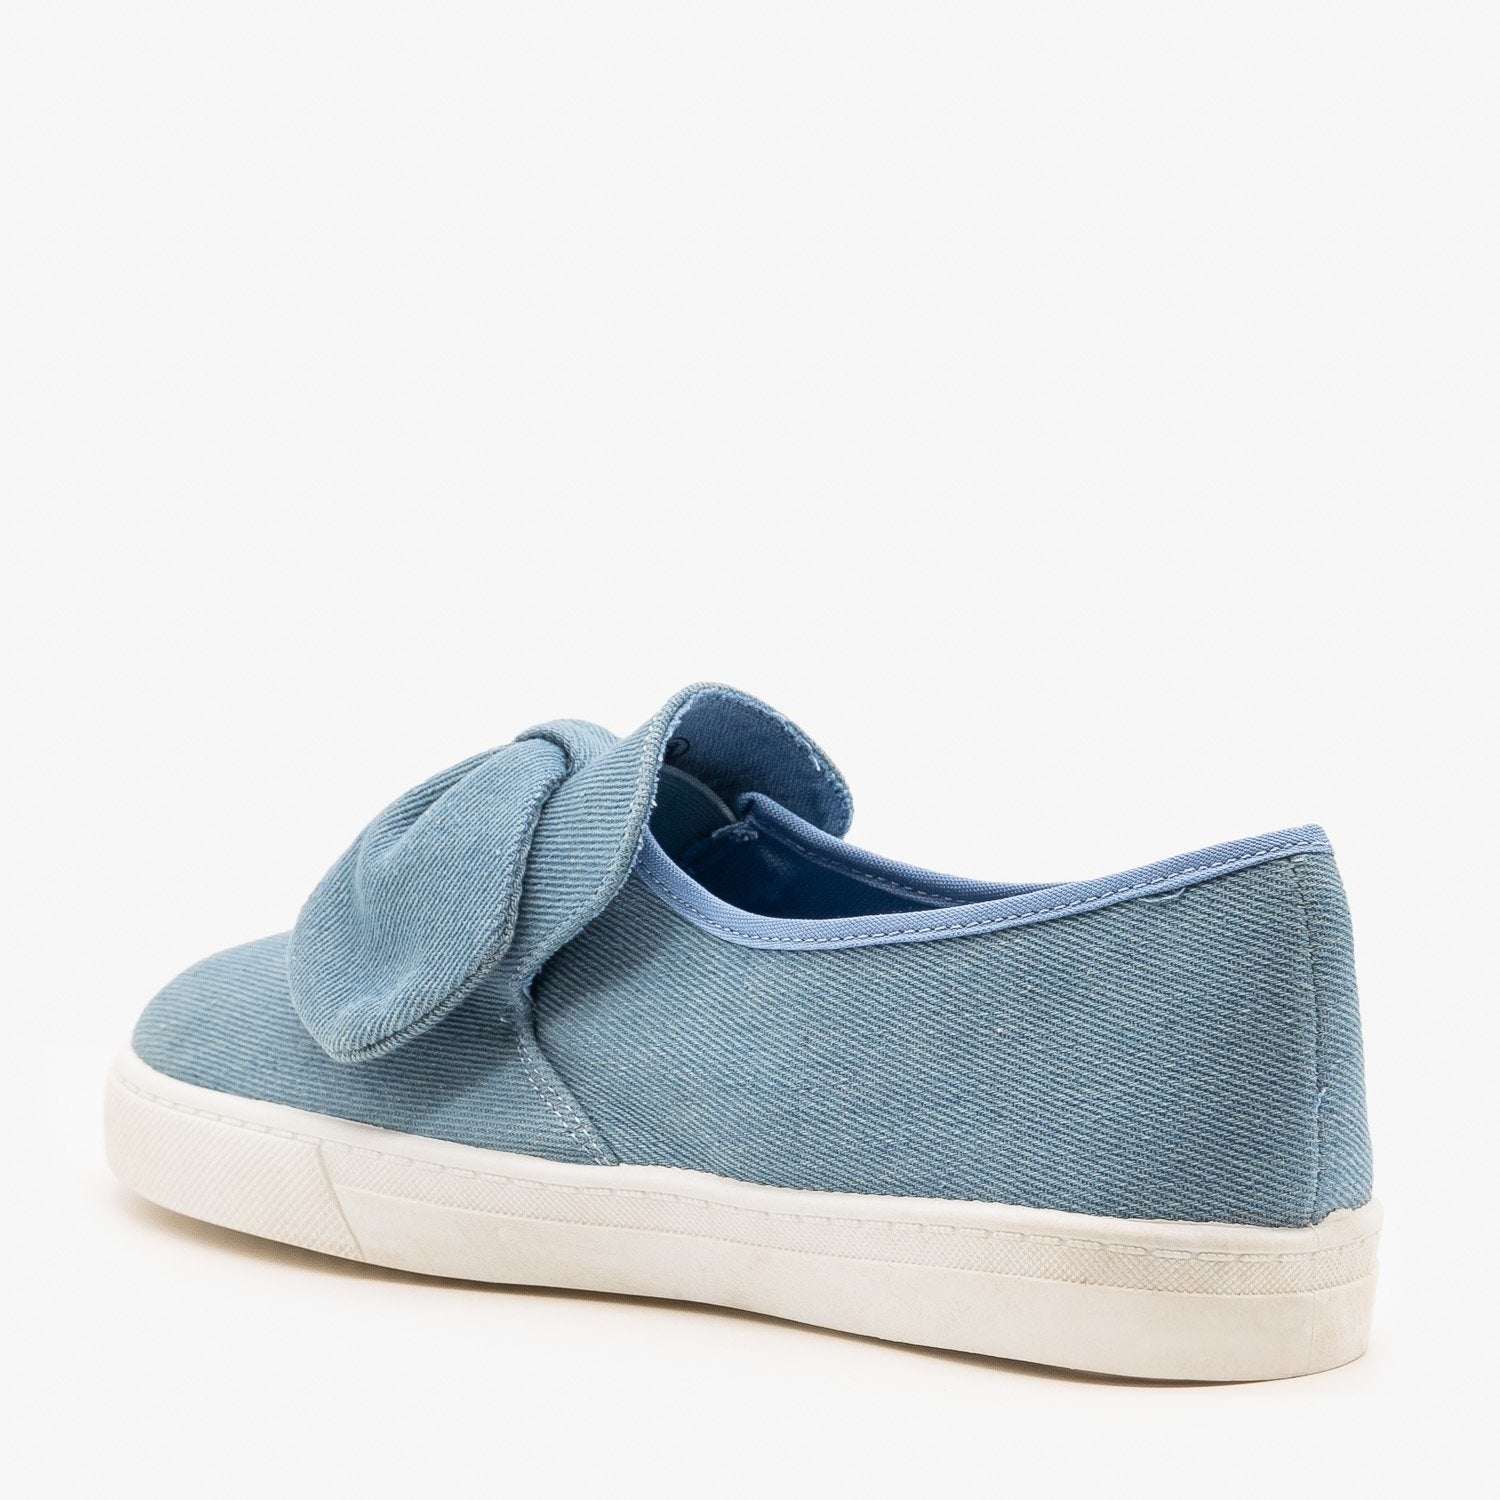 canvas shoes with bows